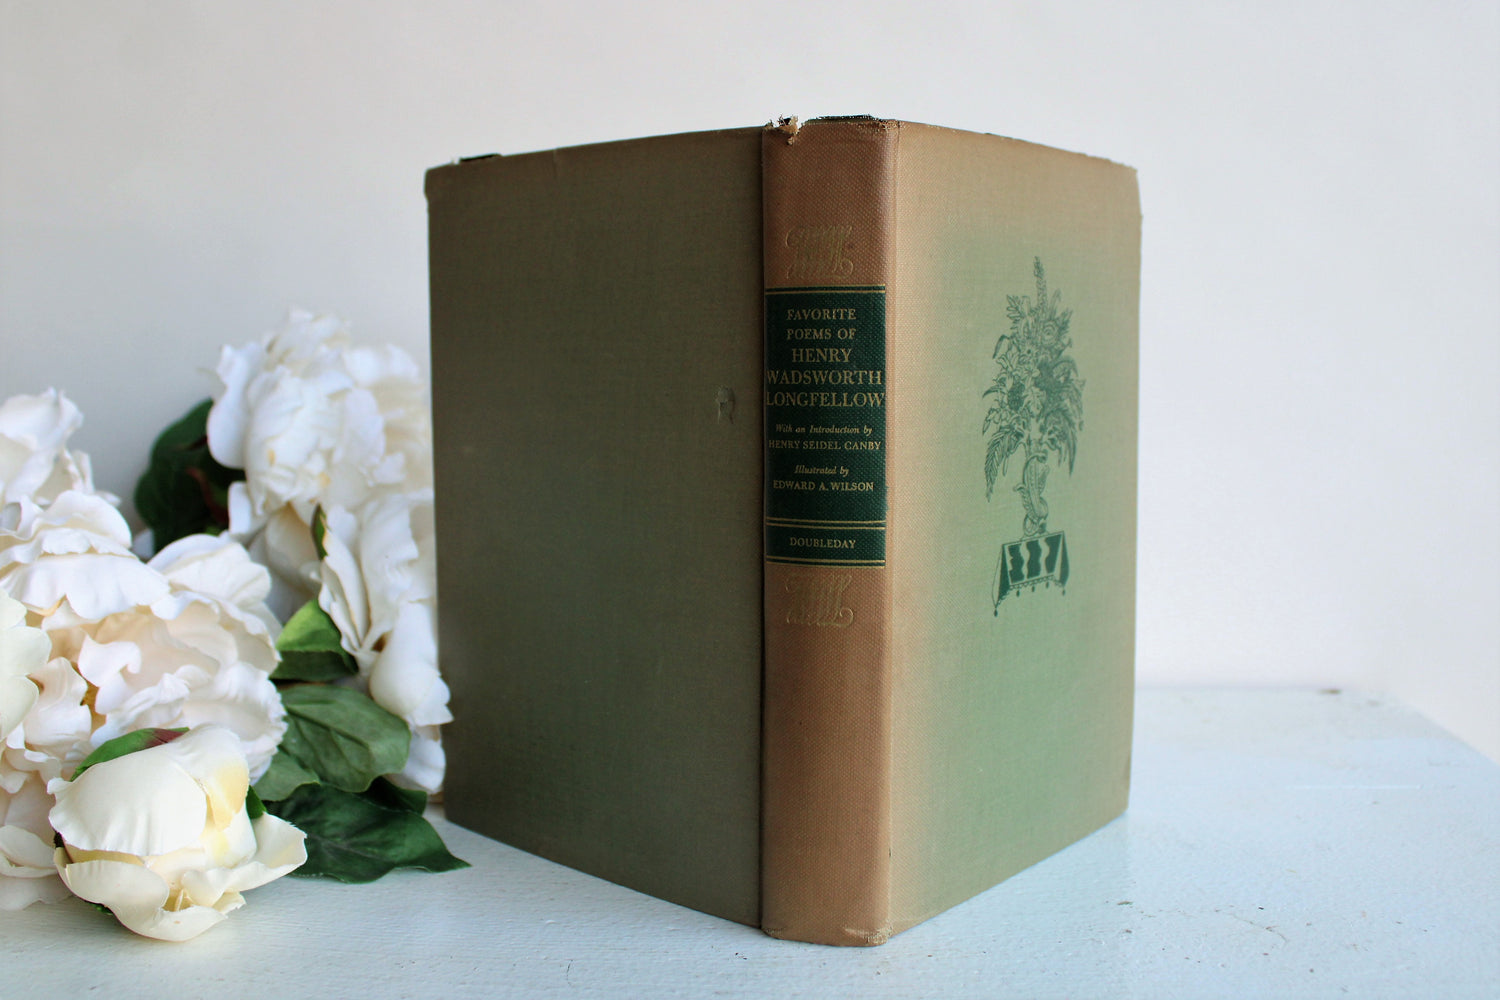 Vintage 1940s Book  "Favorite Poems of Henry Wadsworth Longfellow", First Edition